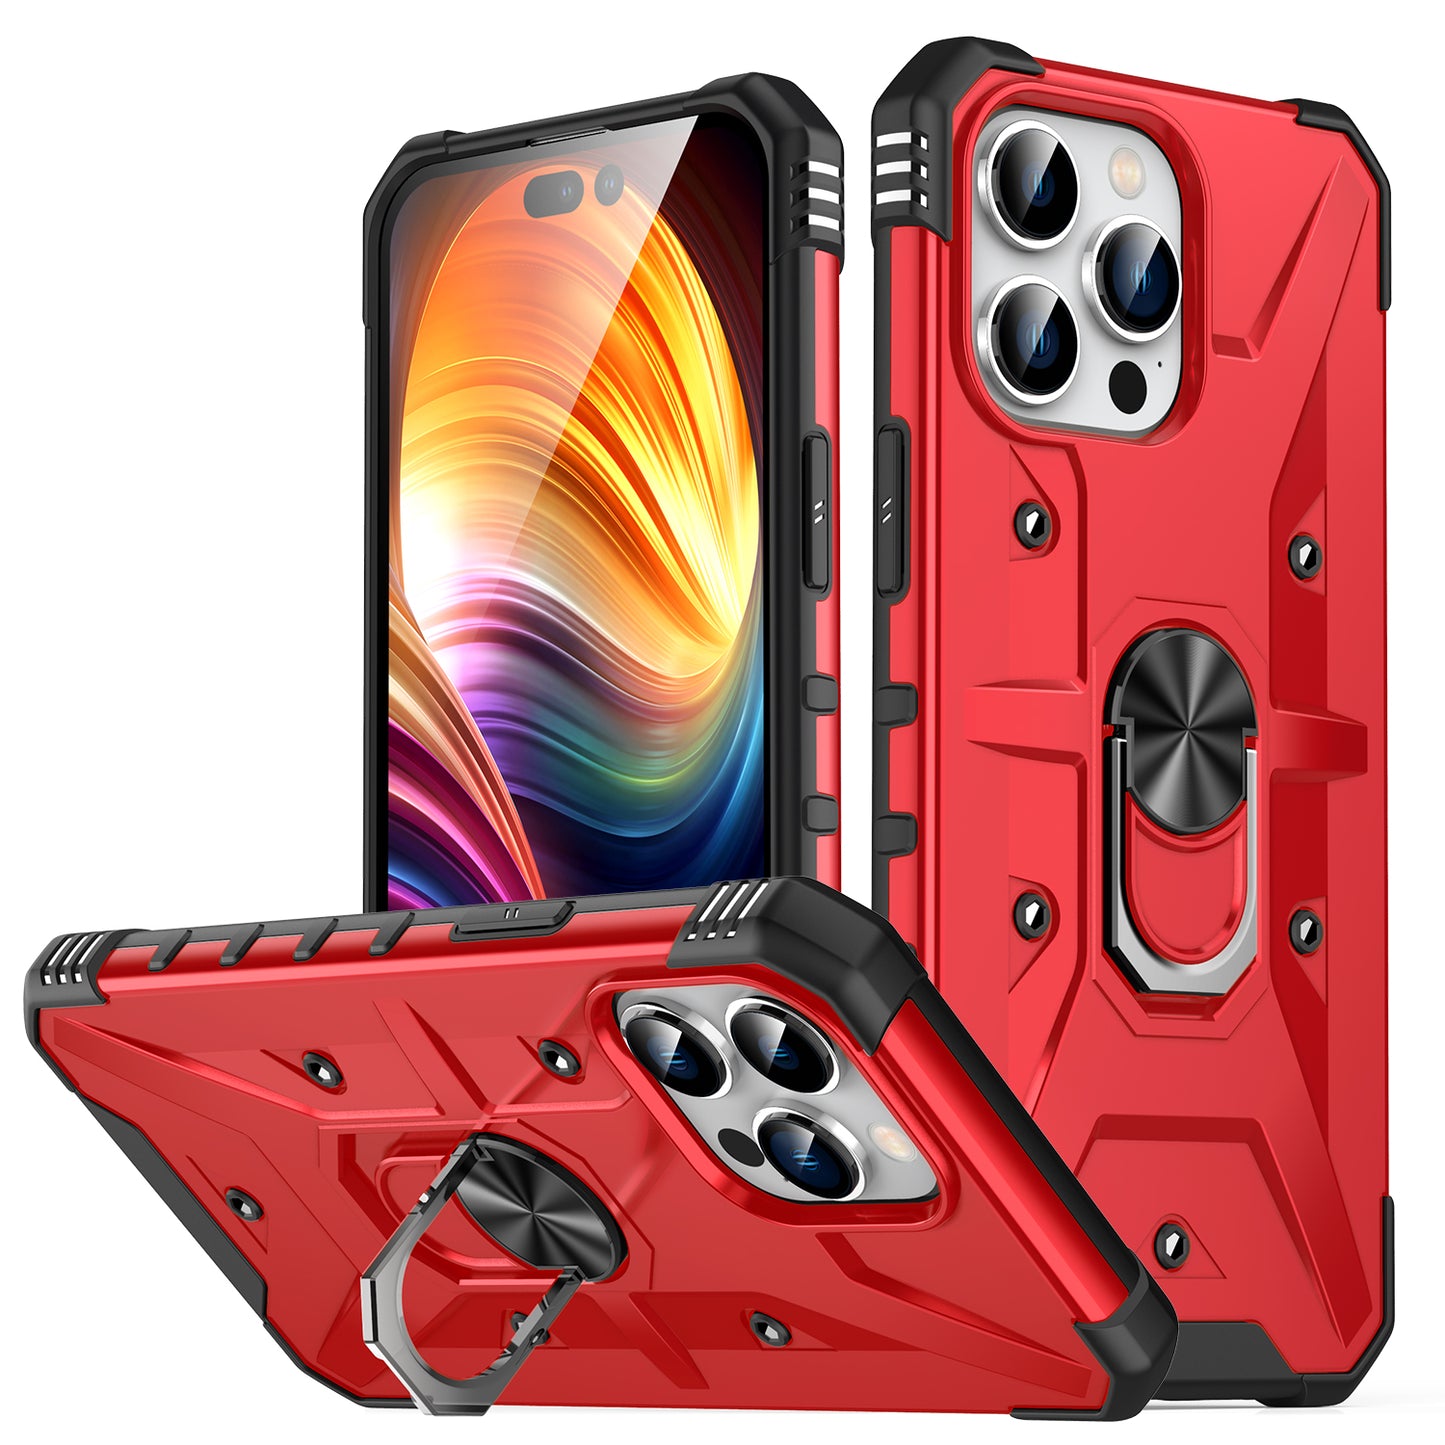 luxury armor case rugged skin heavy duty military shockproof kickstand cover for iphone 11 phone cover